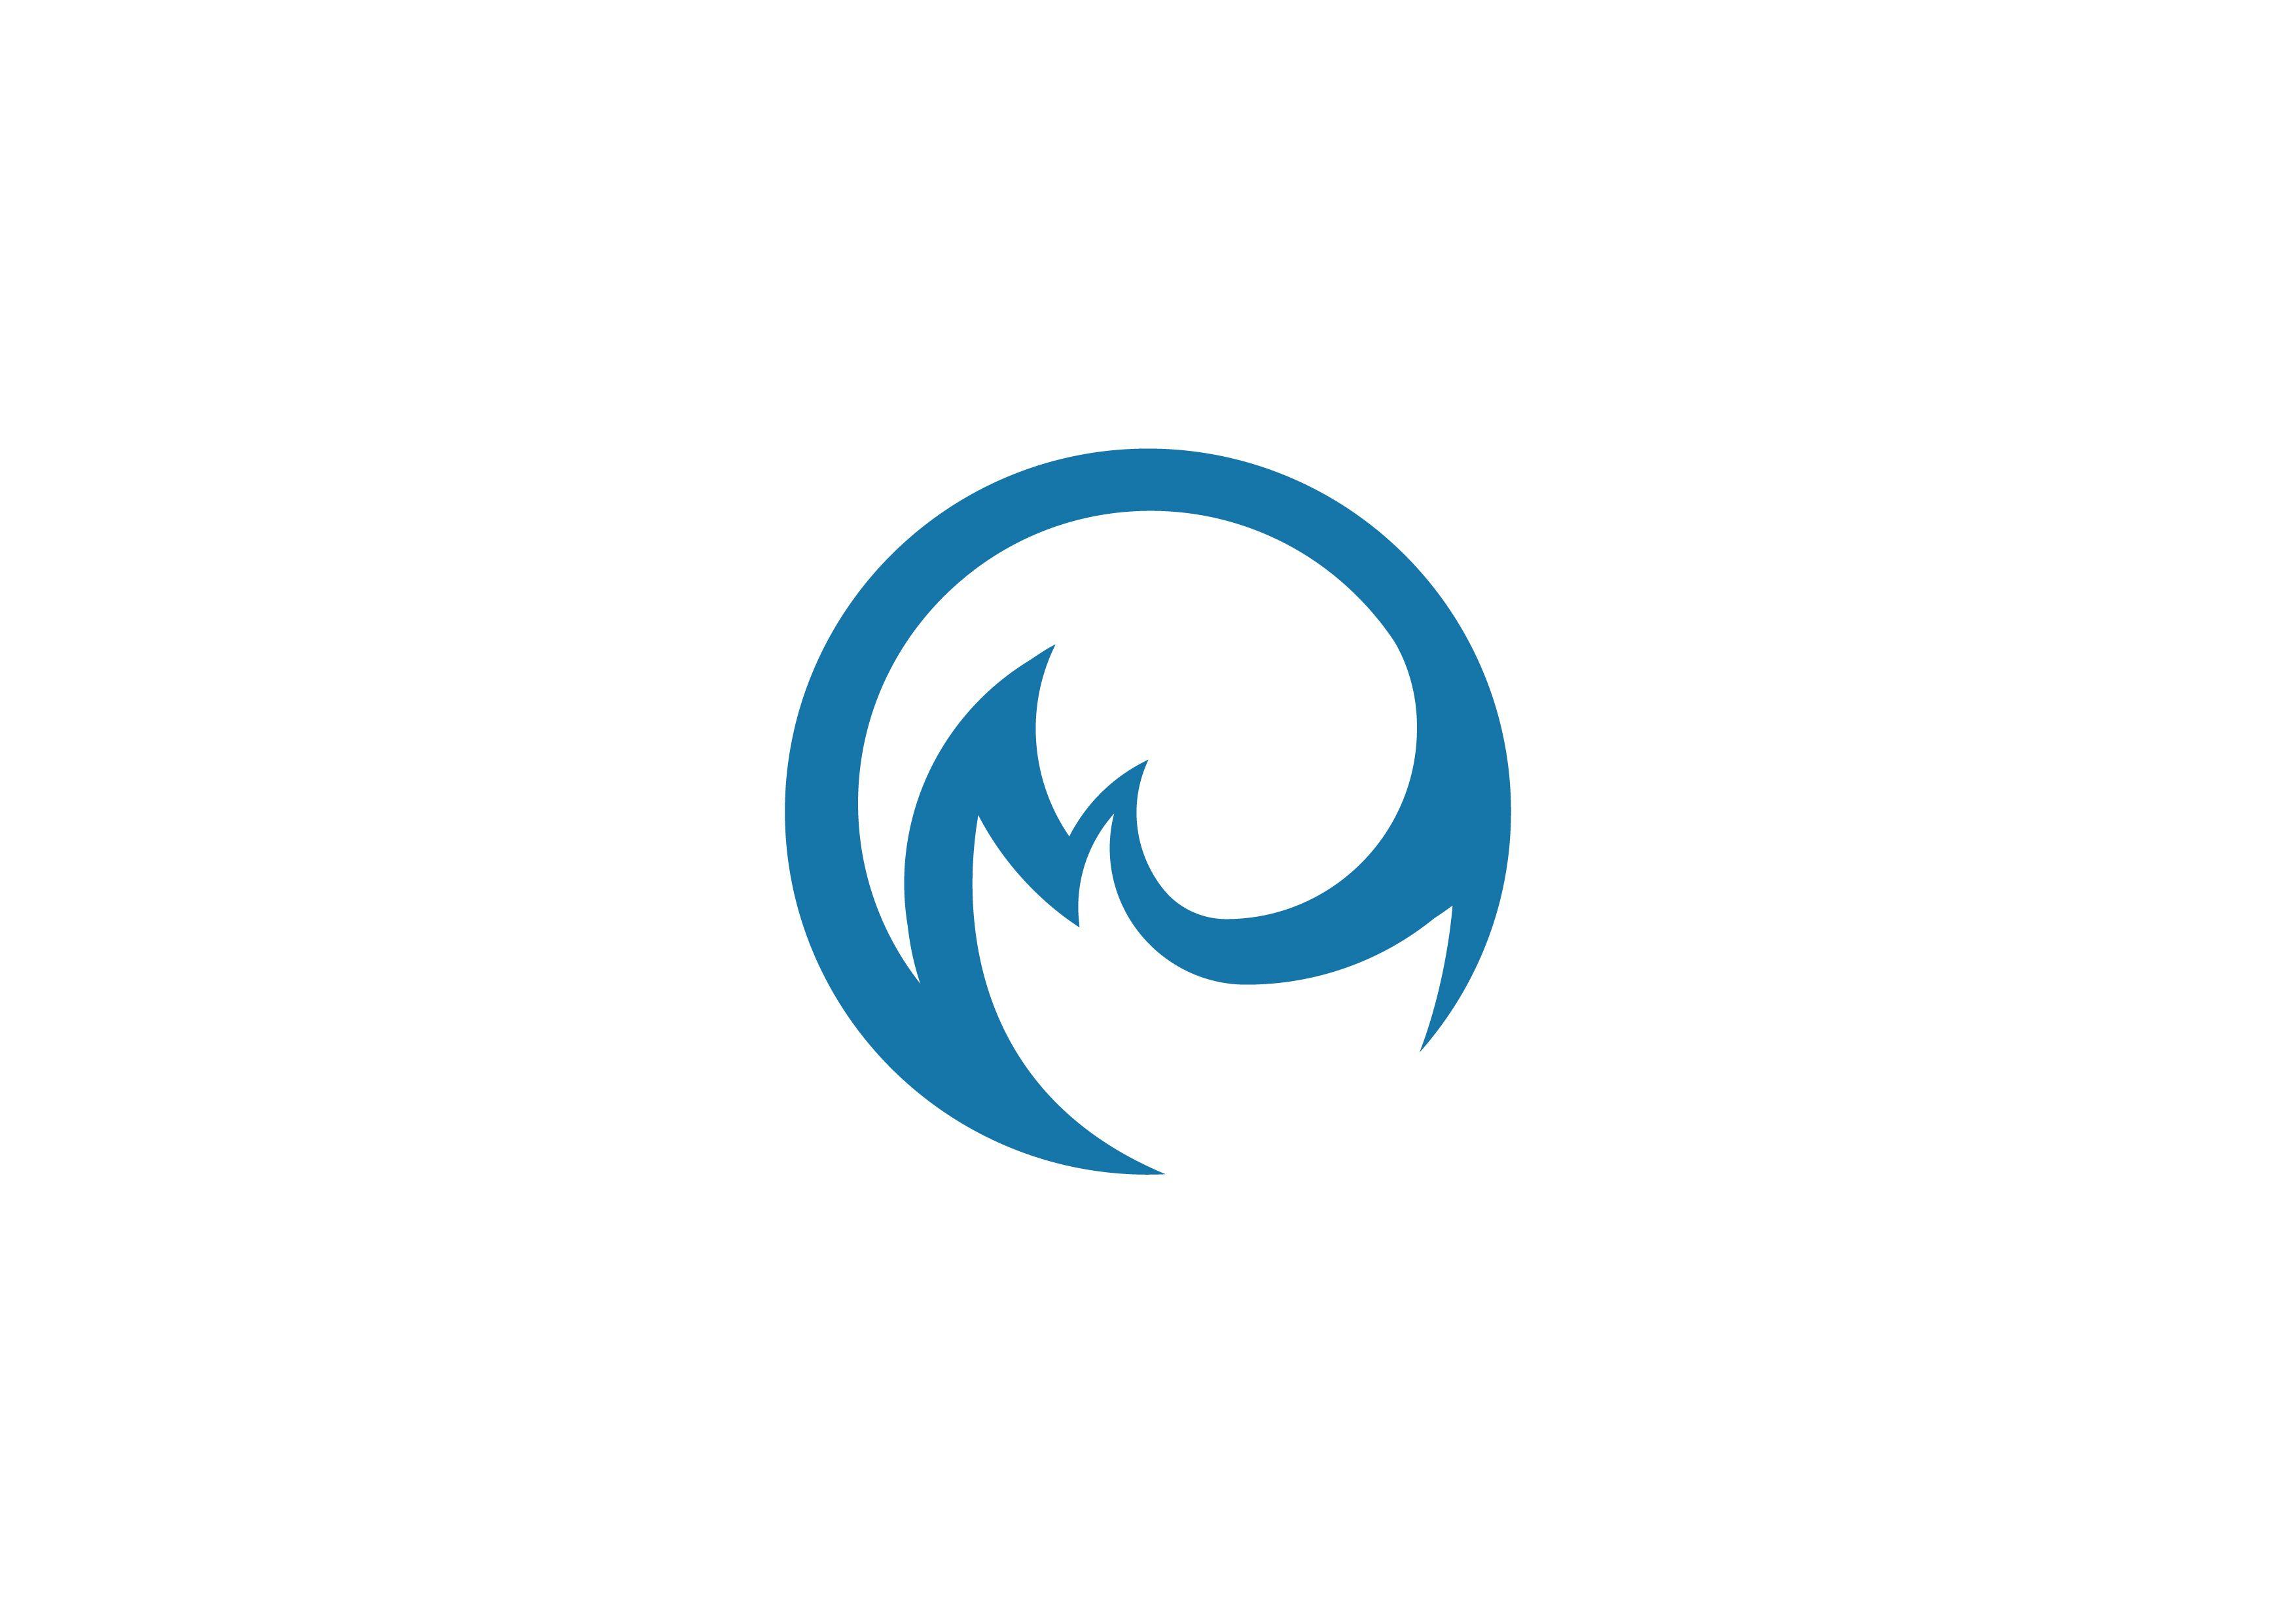 White and Blue D-Logo Logo - Logo | Marine and Freshwater Research Institute